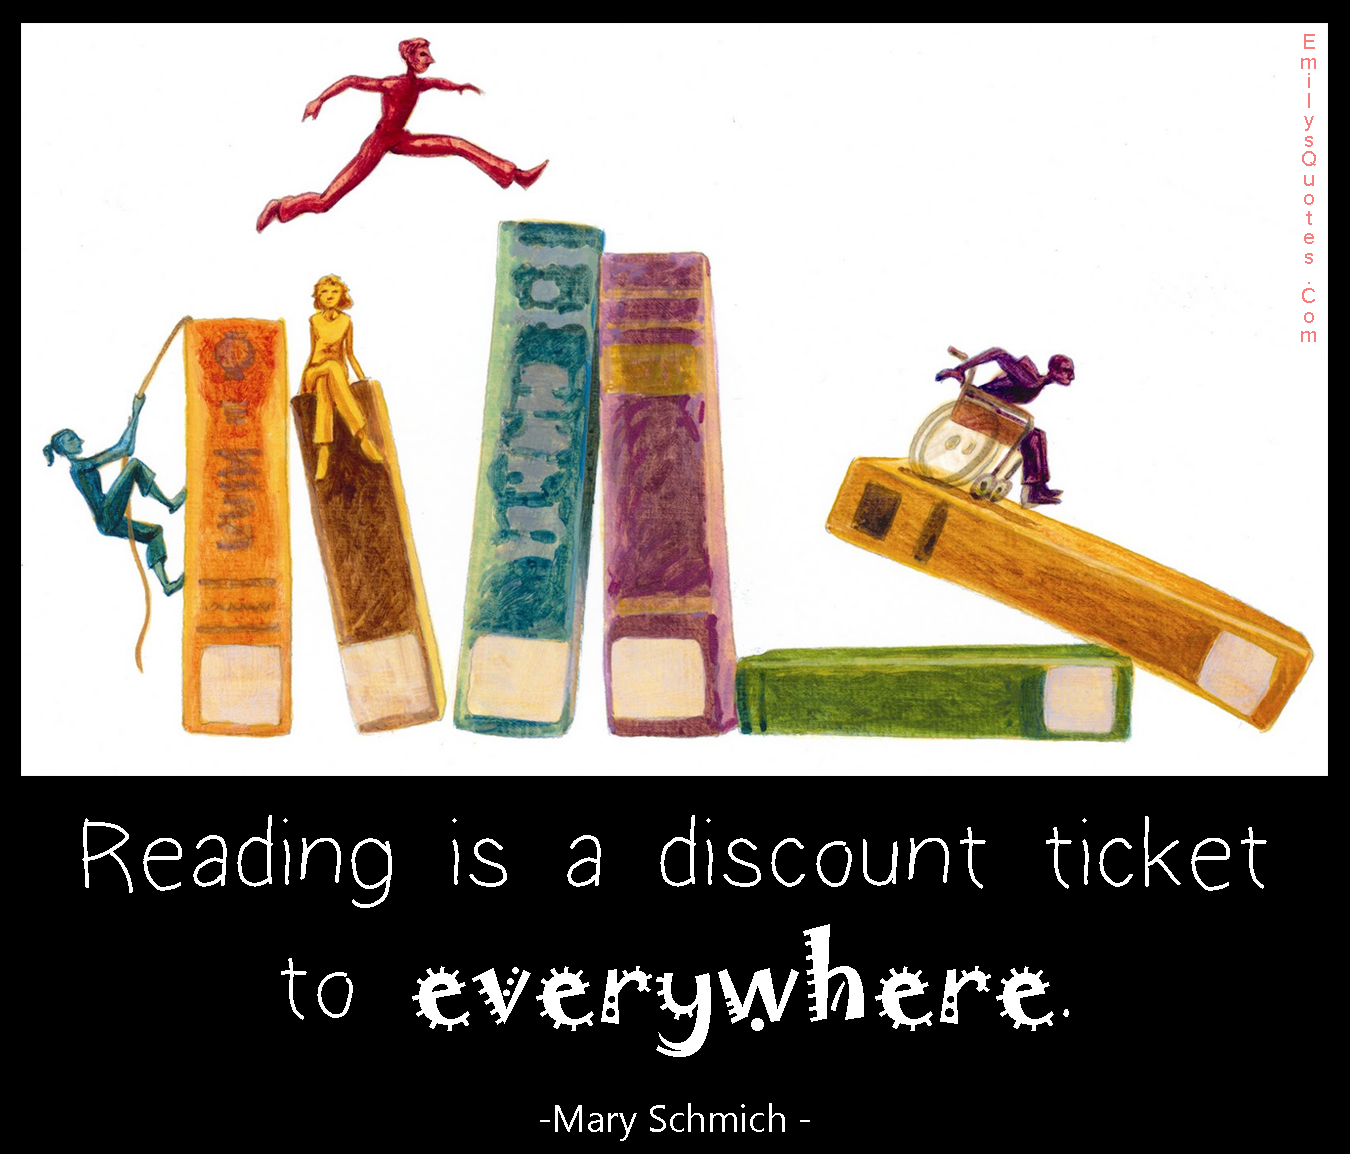 Reading is a discount ticket to everywhere